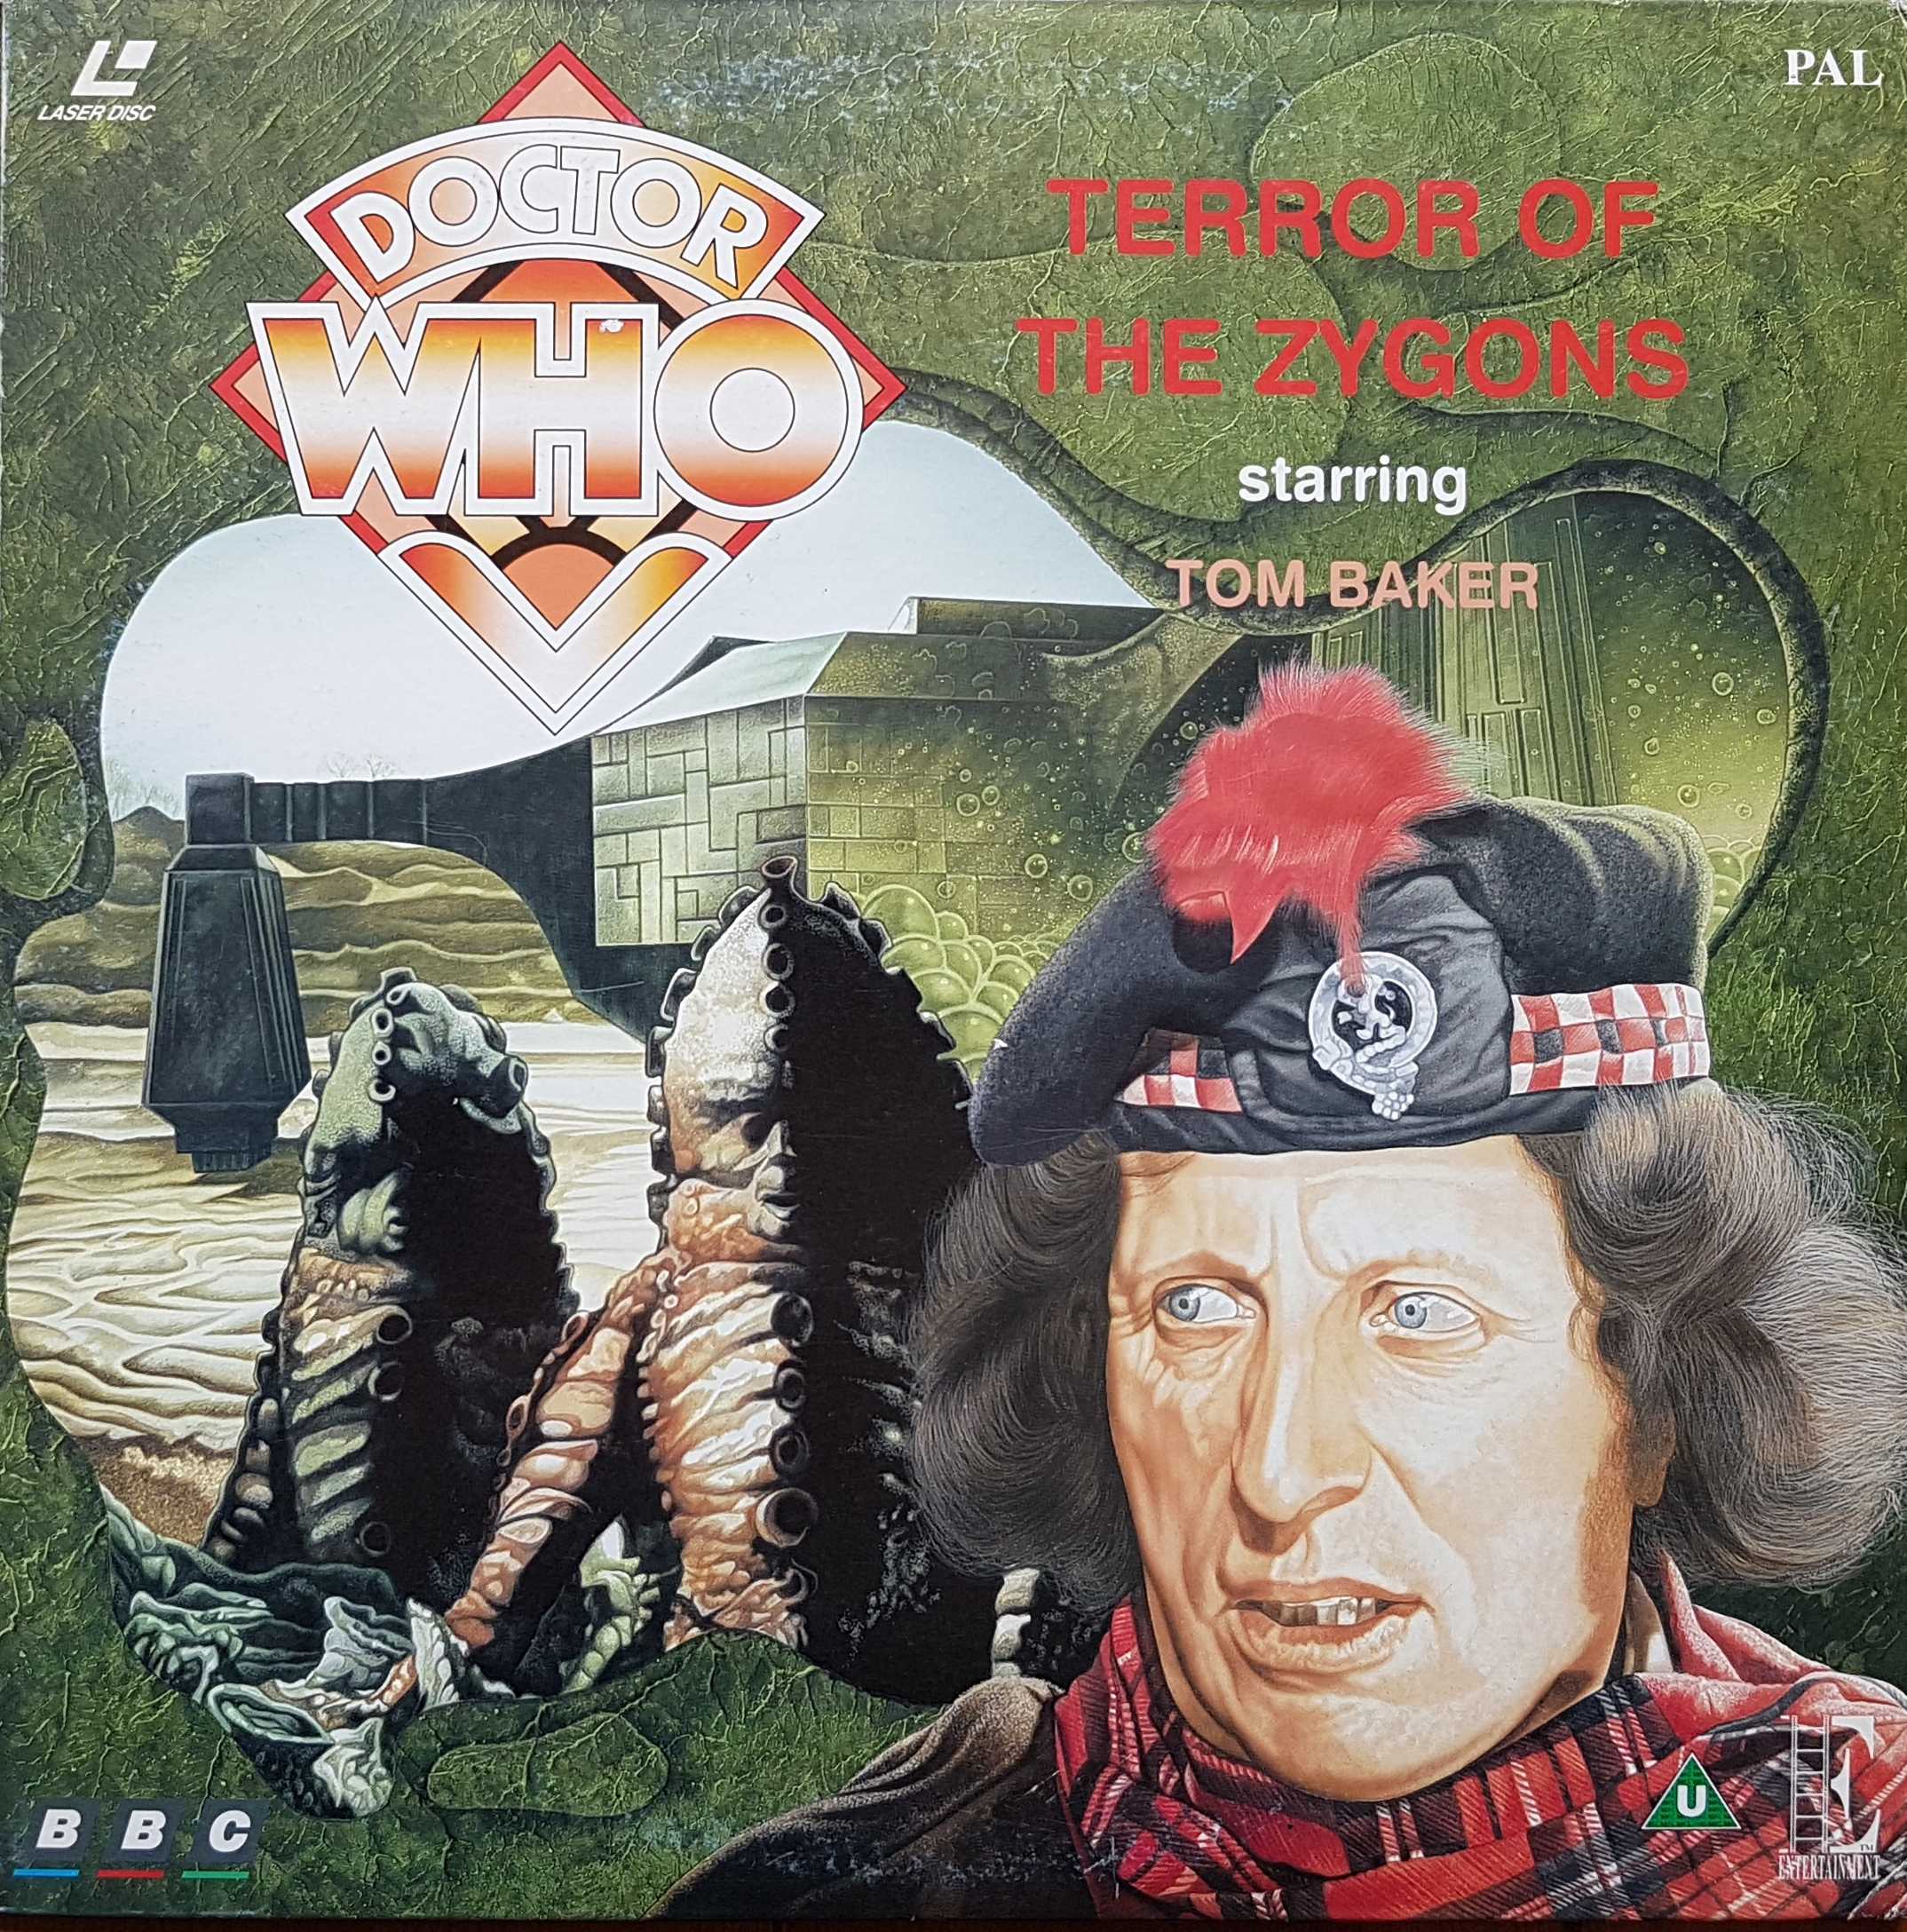 Picture of Doctor Who - Terror of the Zygons by artist Robert Banks Stewart from the BBC anything_else - Records and Tapes library